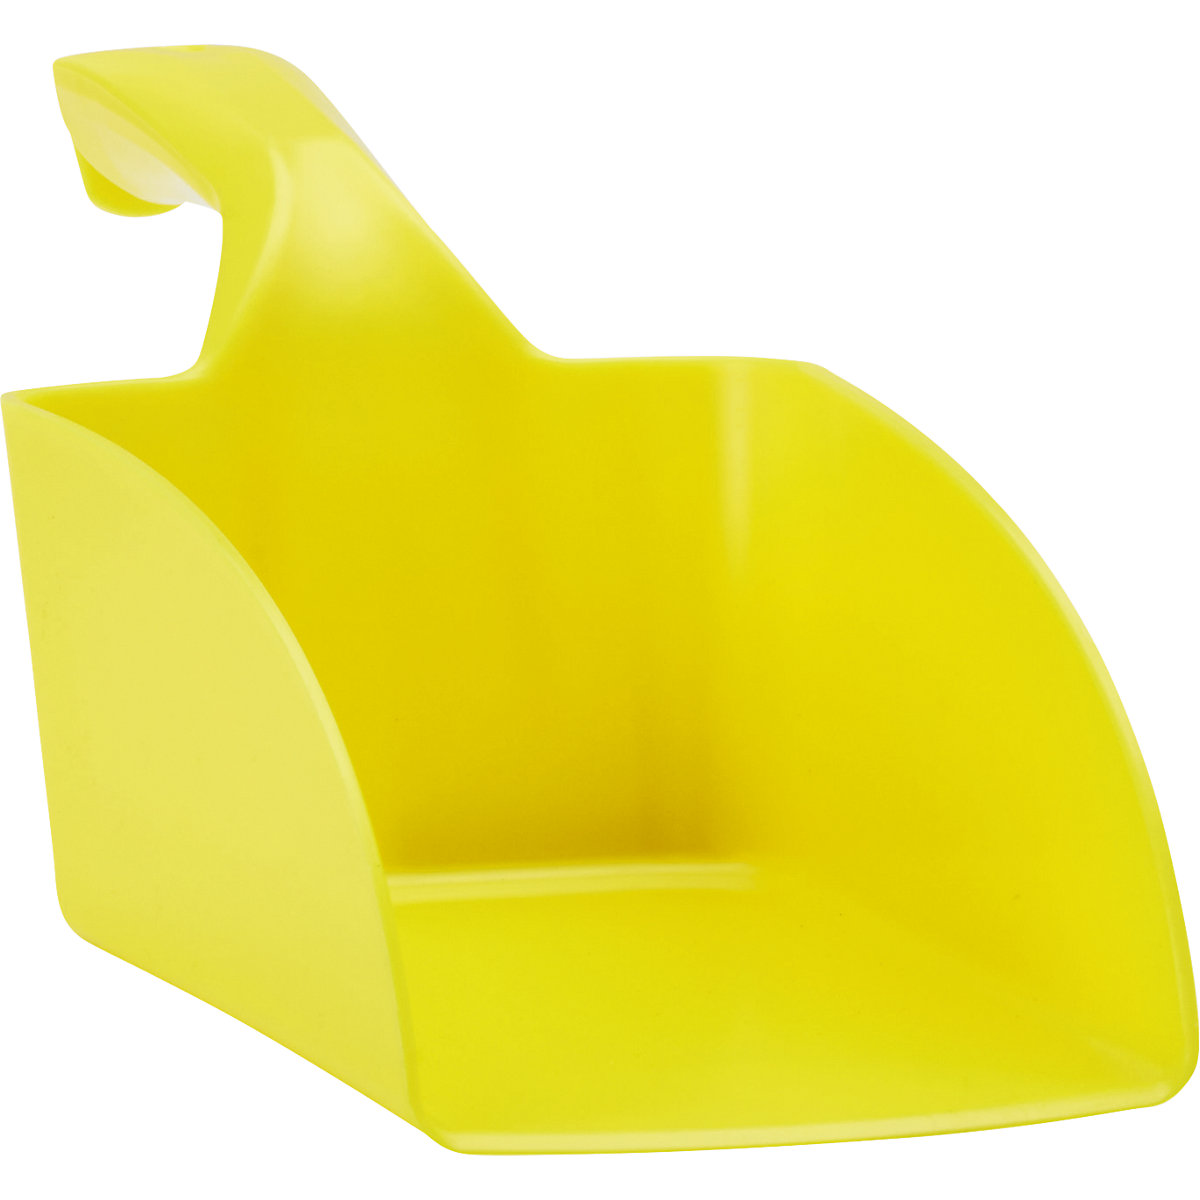 Hand shovel, suitable for foodstuffs – Vikan, capacity 0.5 l, pack of 15, yellow